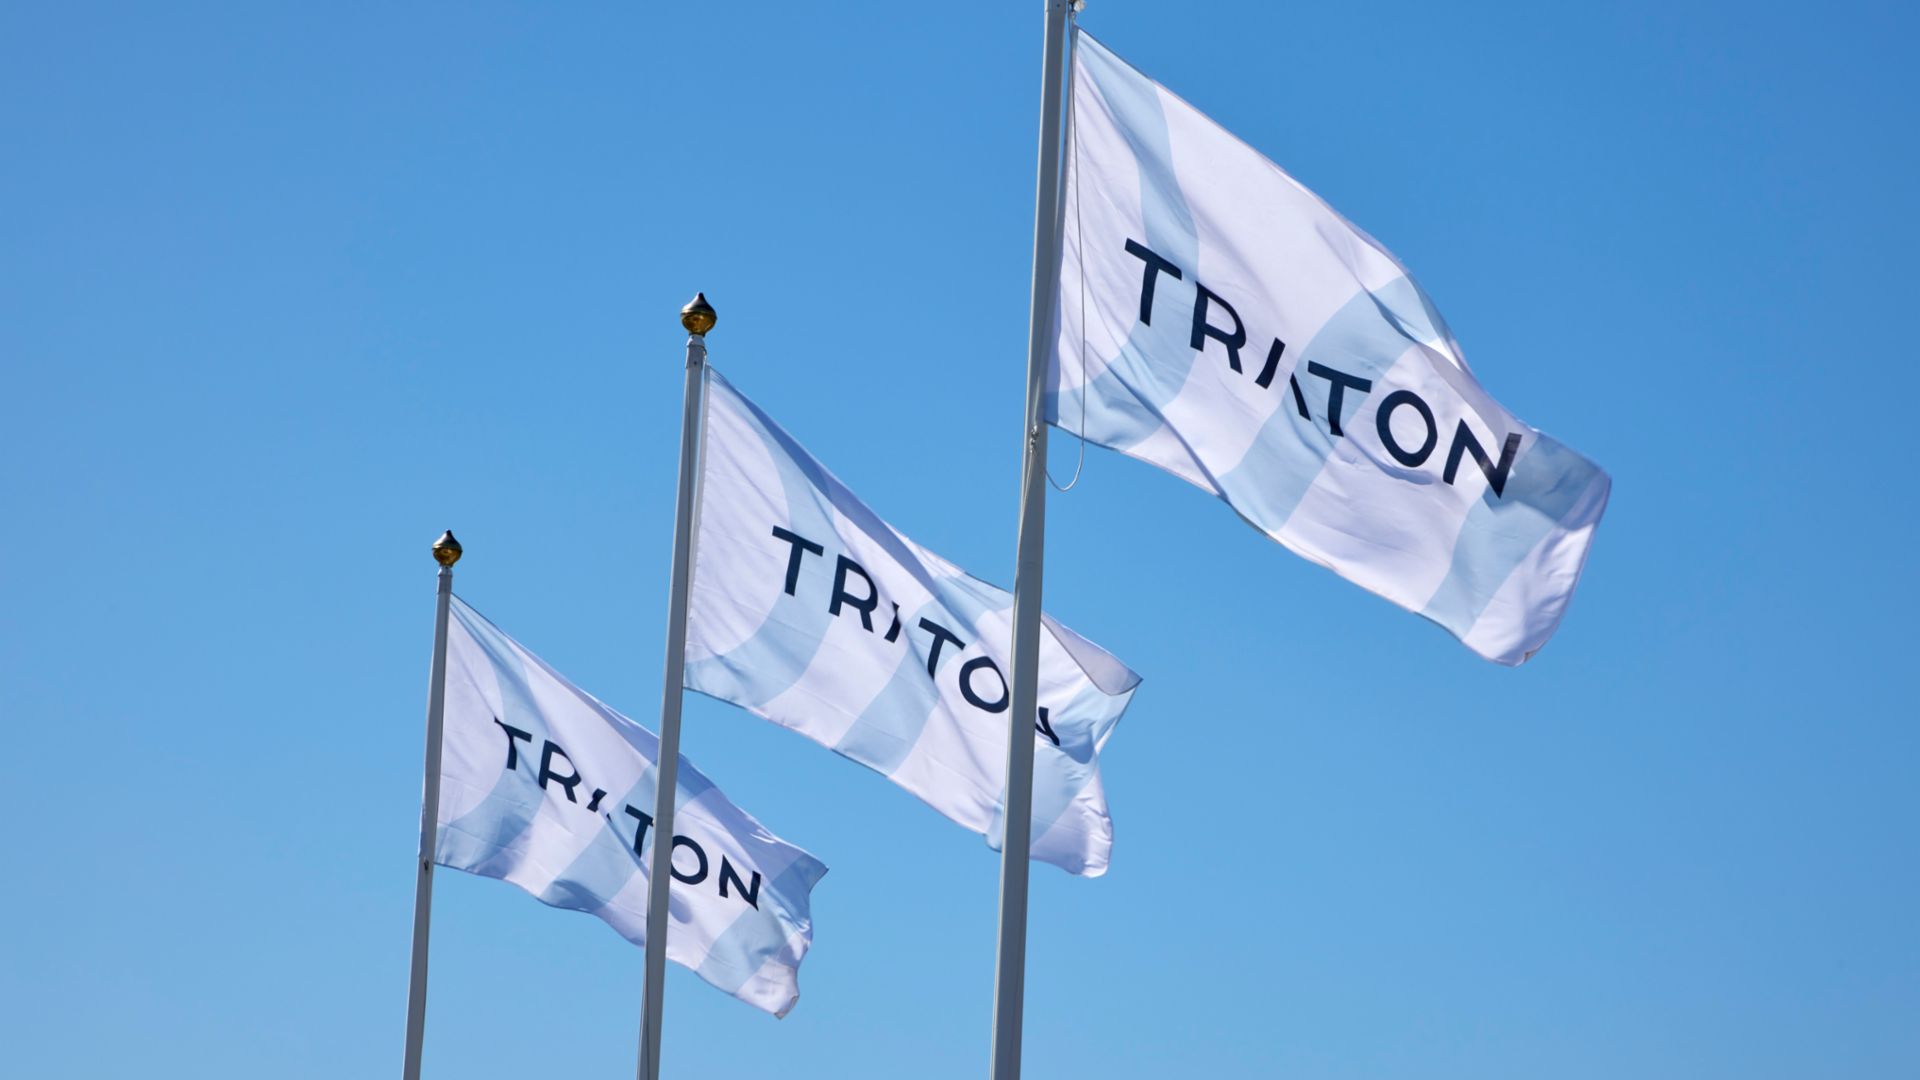 TRATON GROUP Flags